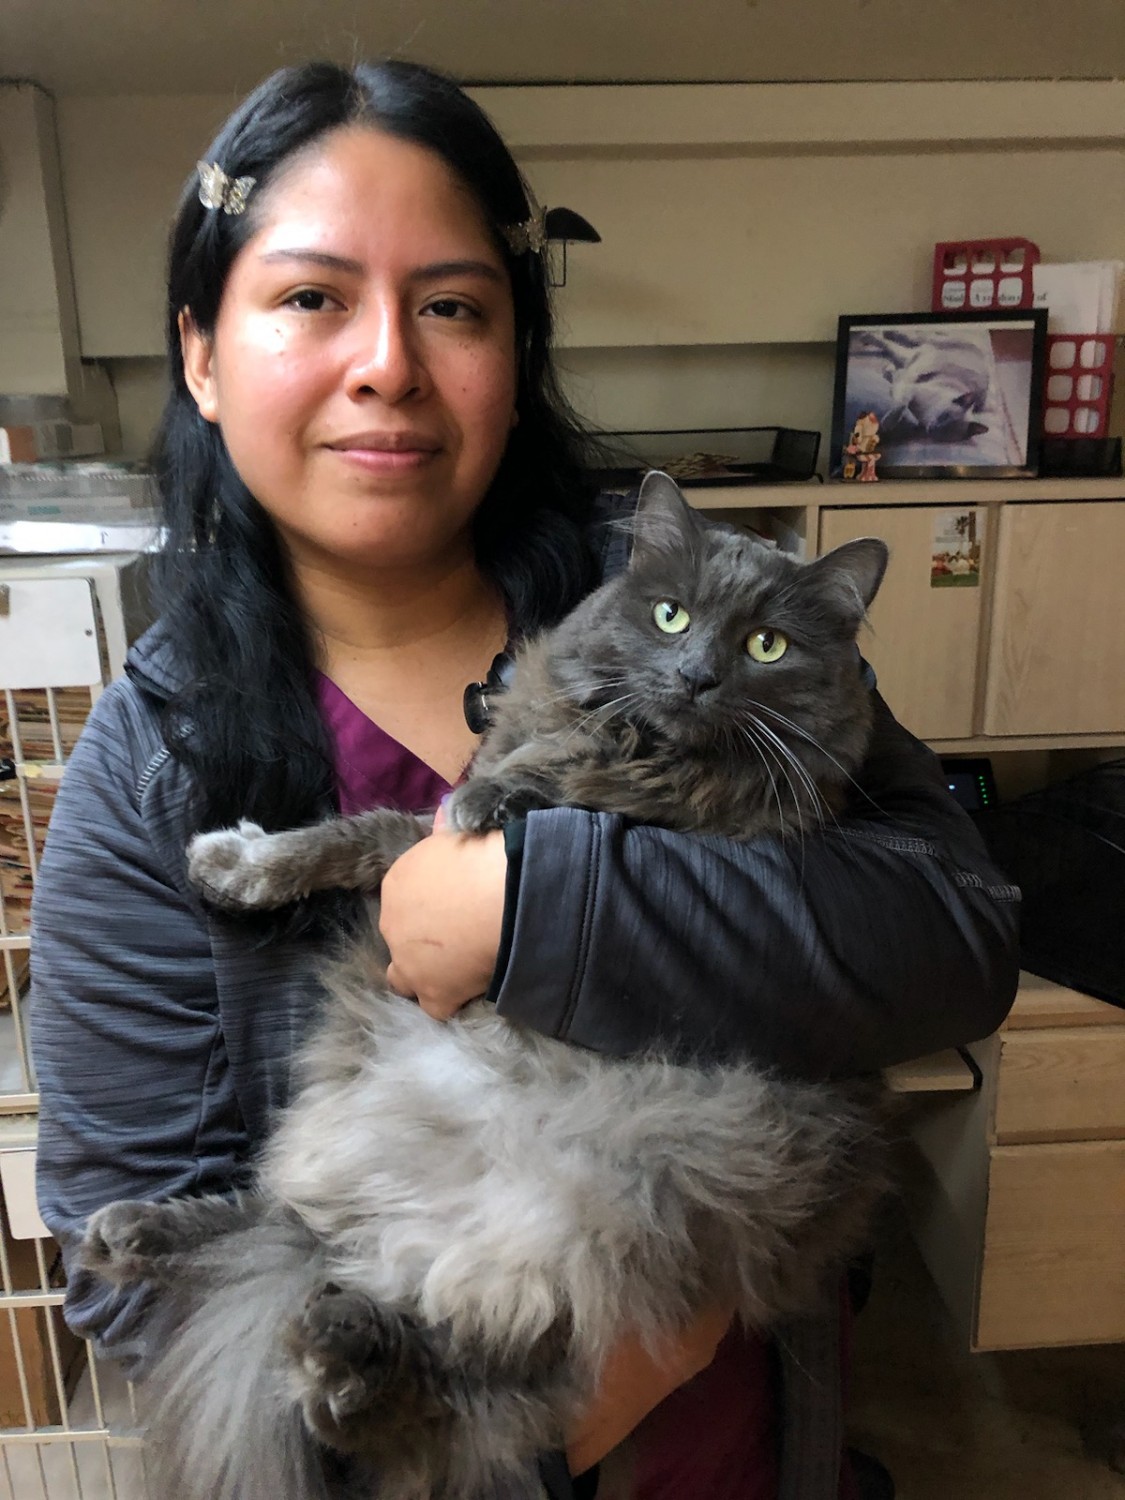 Maria holding a fluffy grey Cat